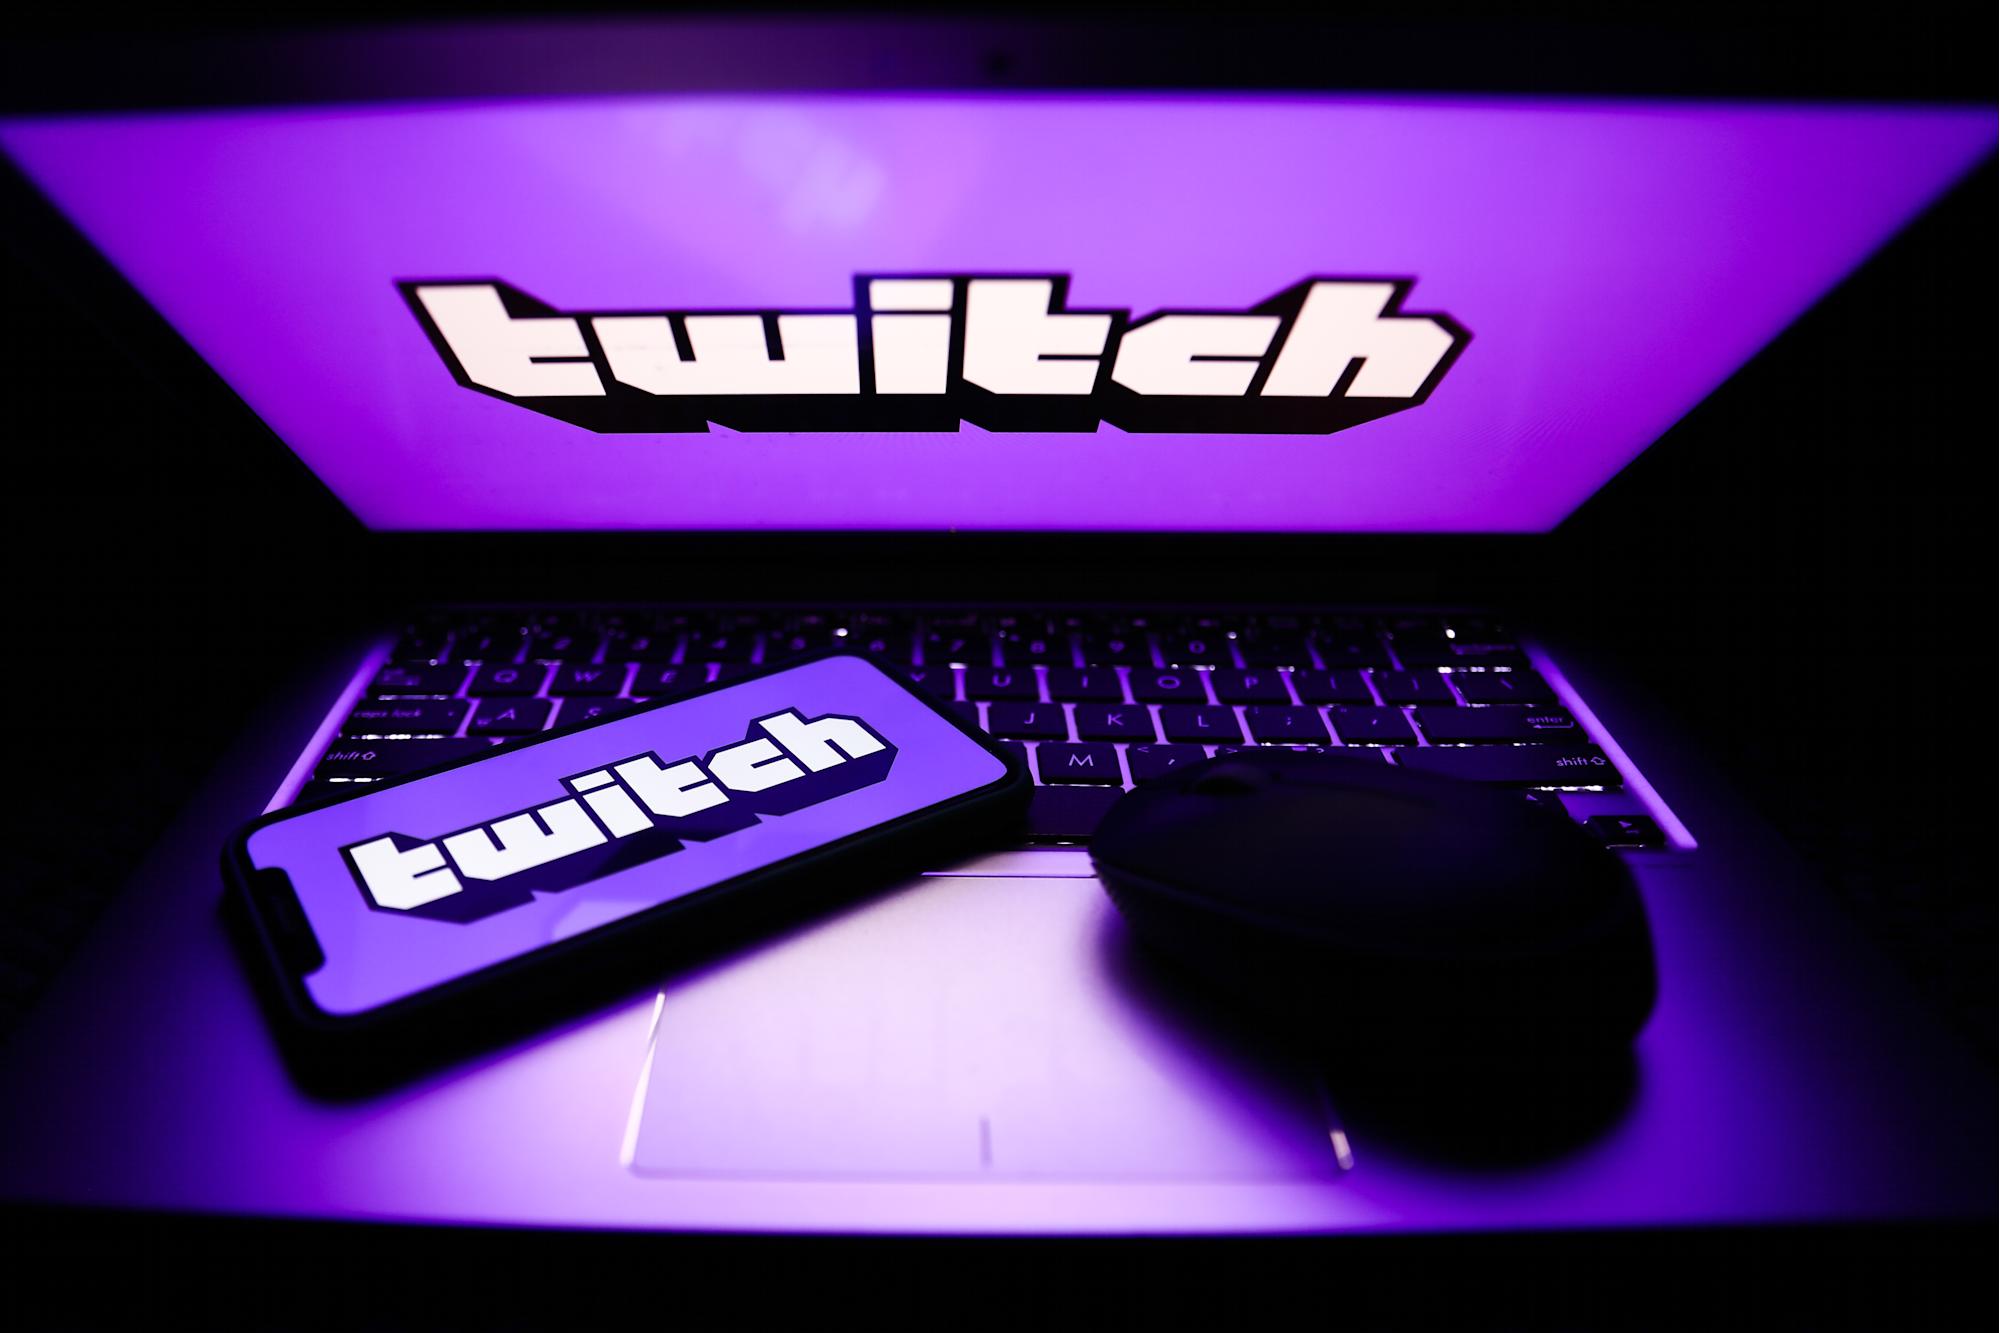 Twitch is adding over 350 tags to help make streams more inclusive